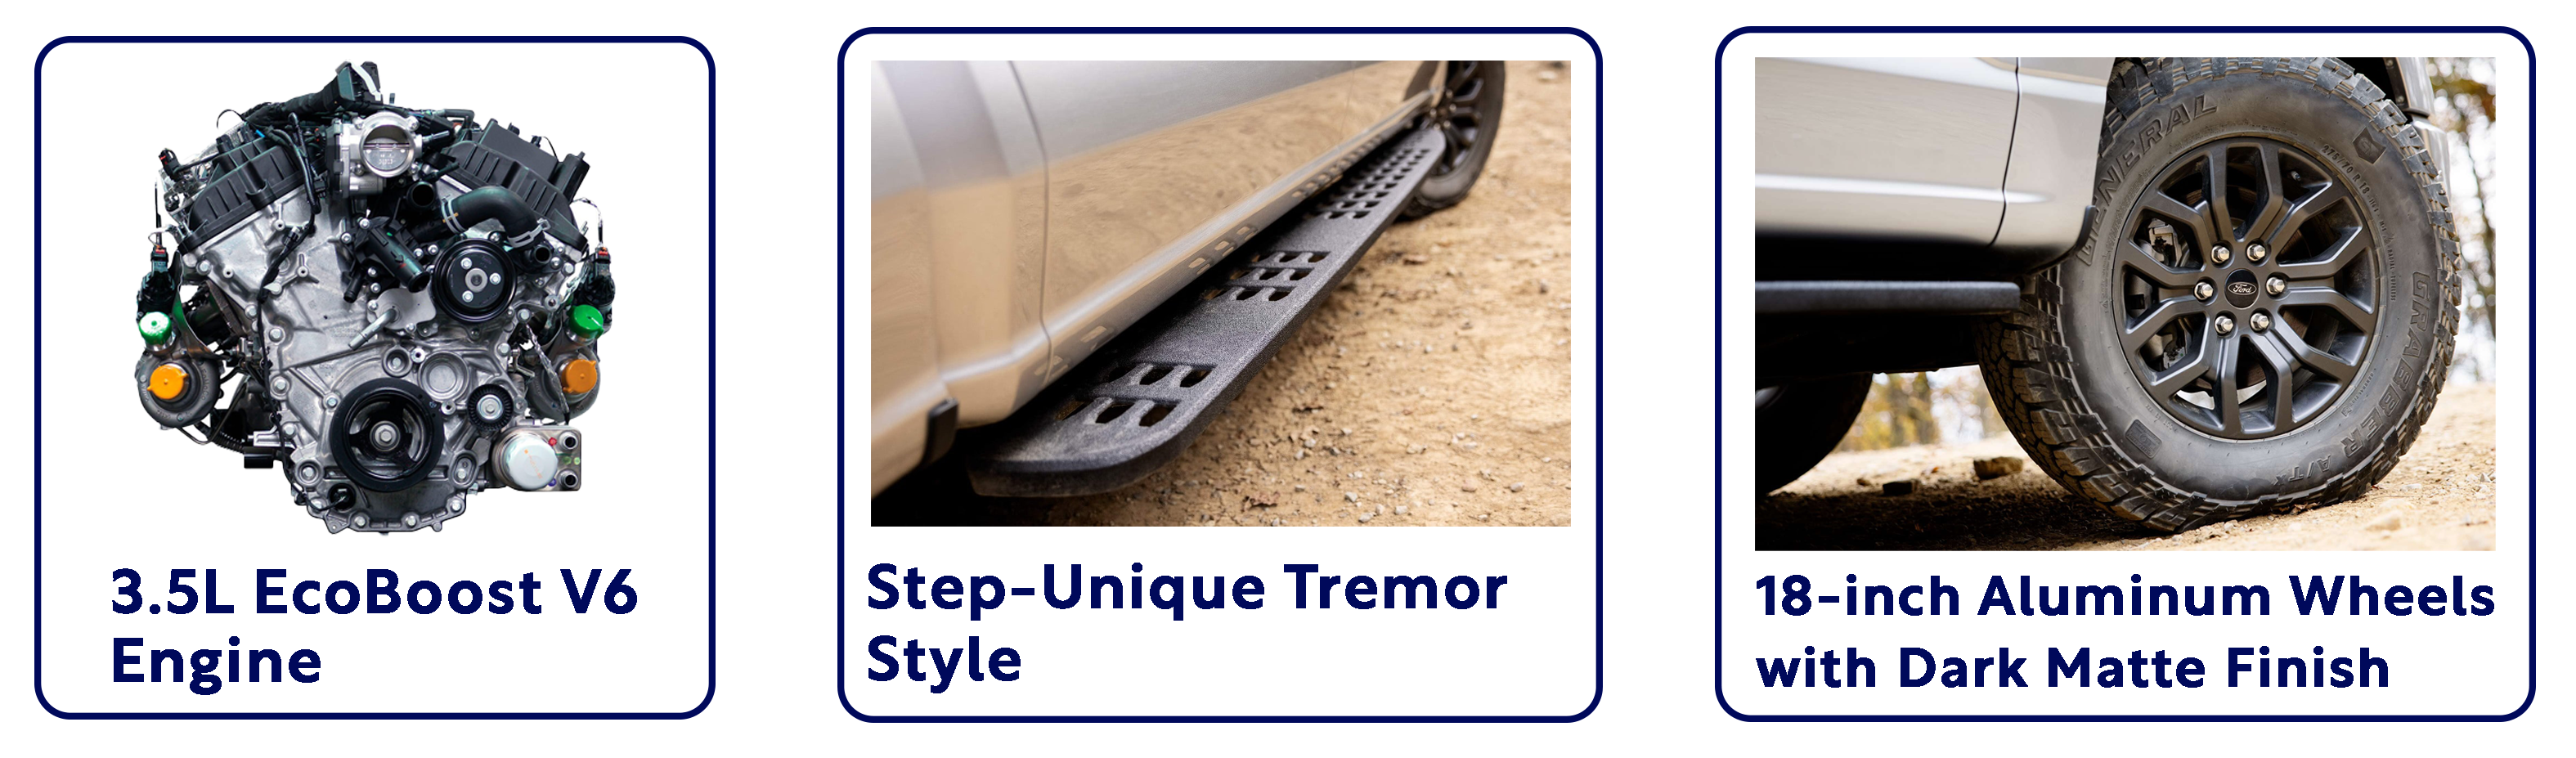 key features - tremor